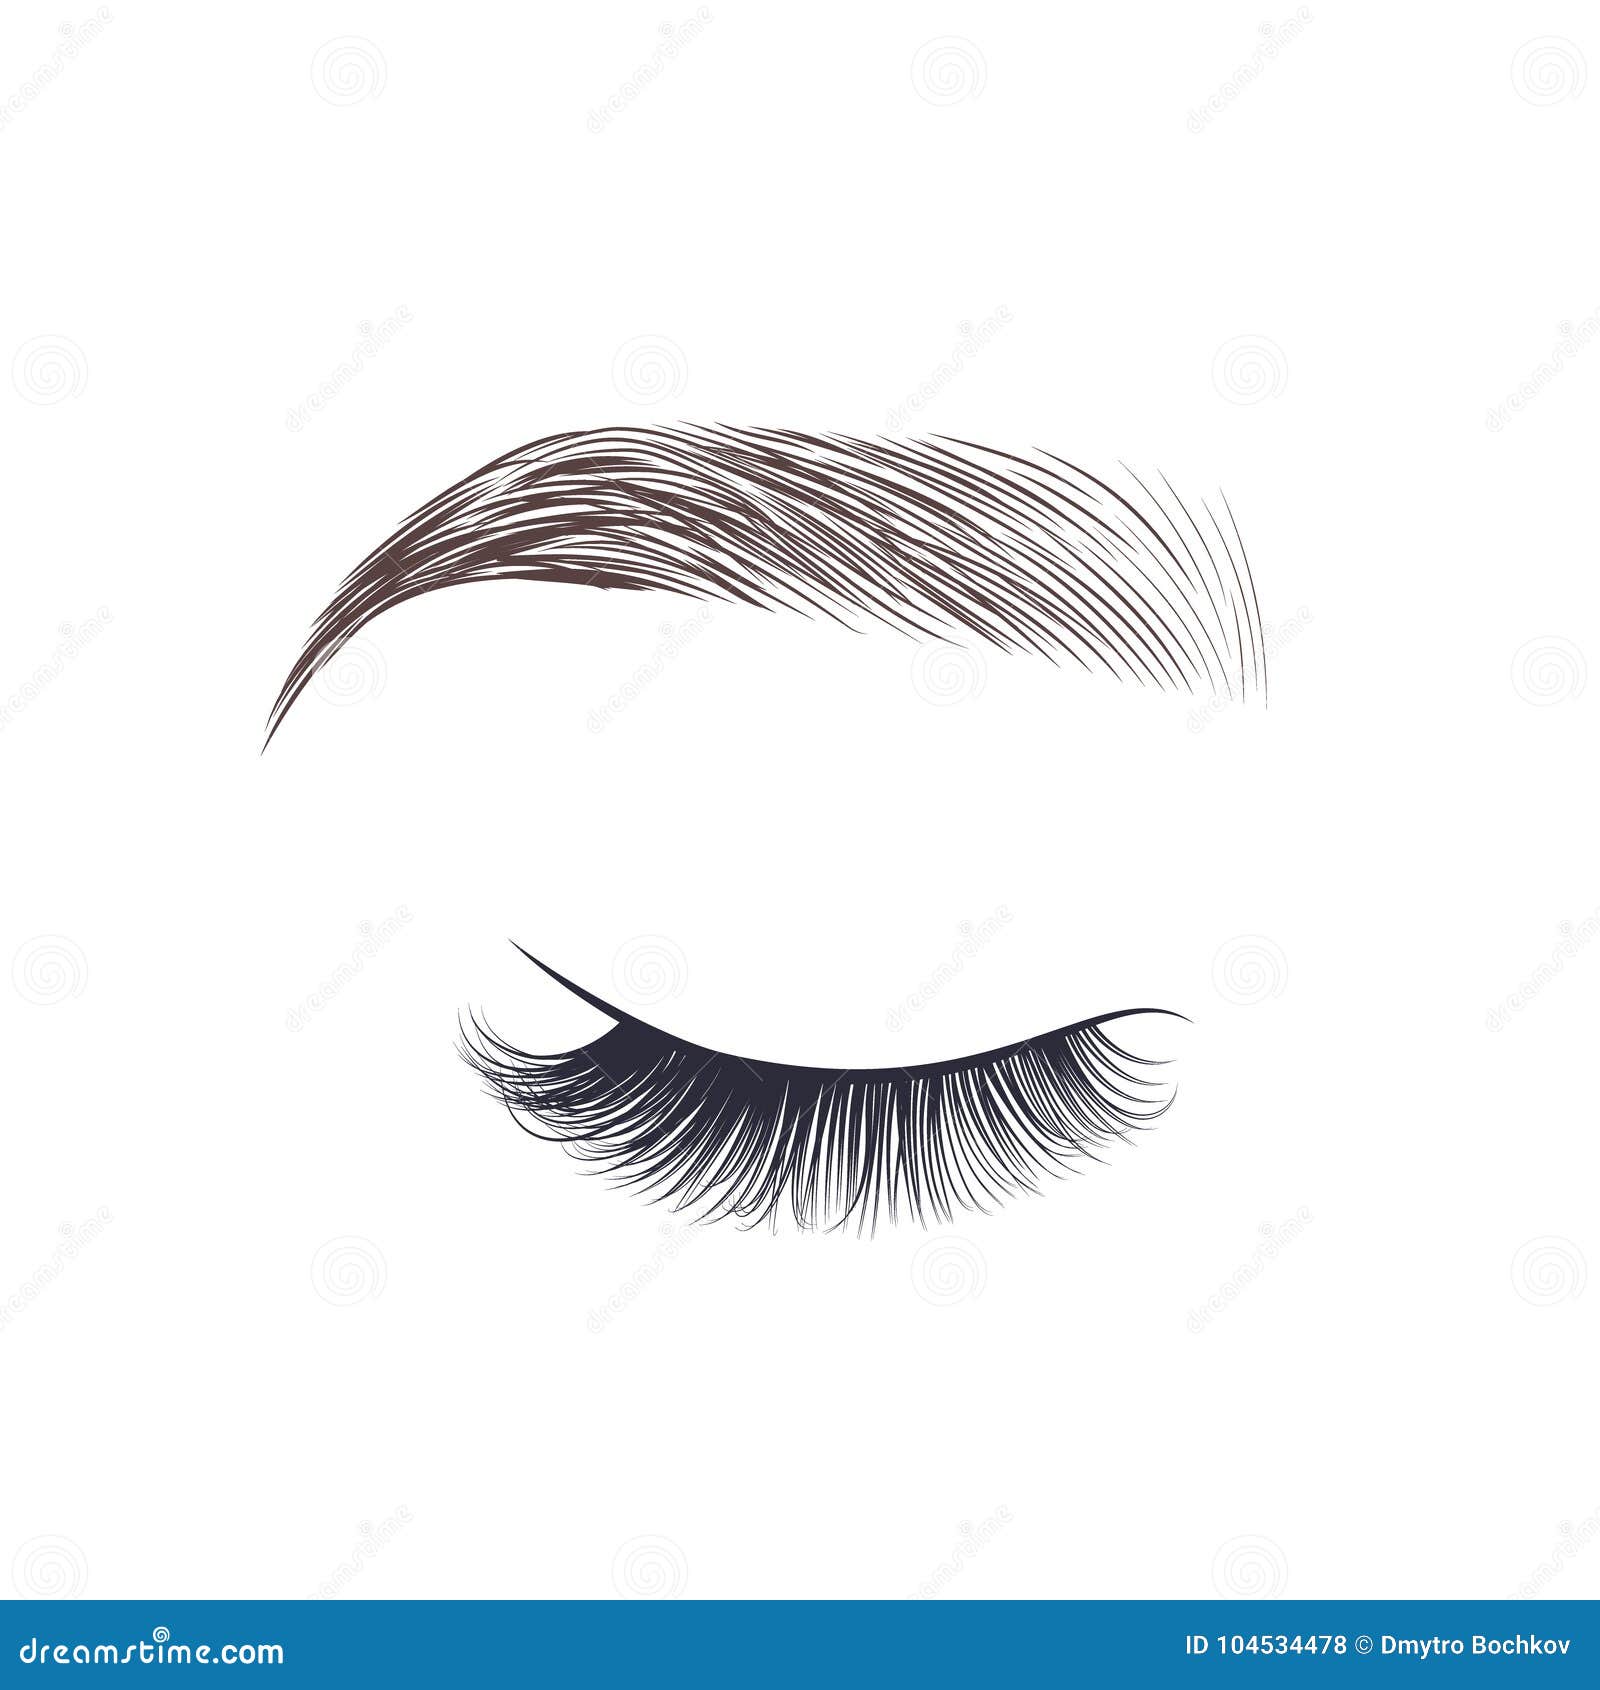 How to Draw Eyebrows Step by Step Realistic Drawing Tutorial